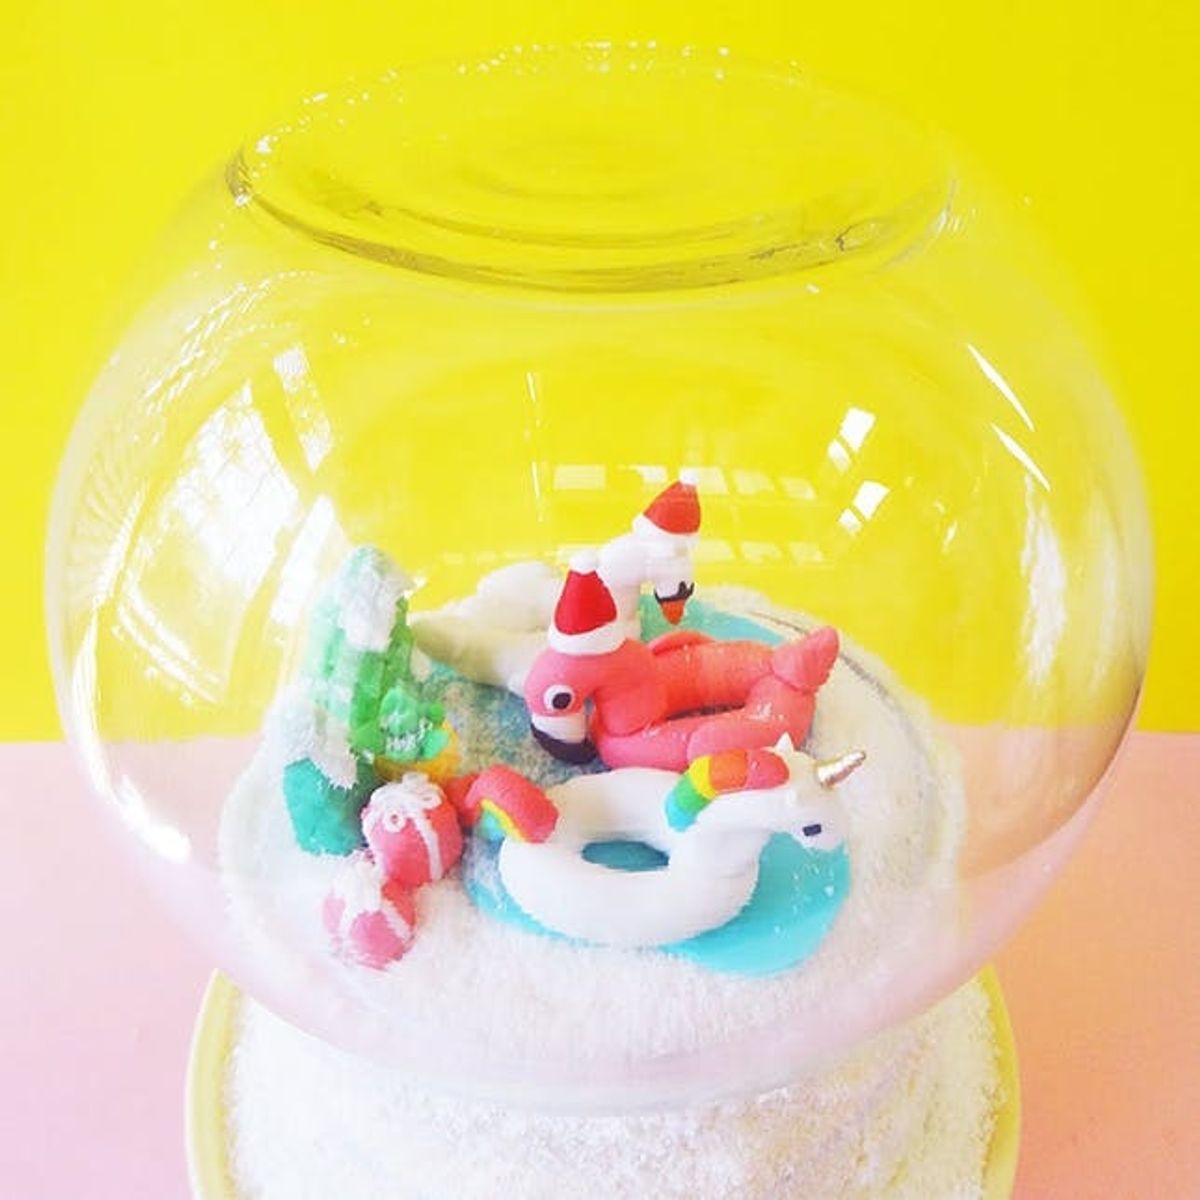 14 Buddy the Elf-Approved Snow Globes to Buy or DIY This Year